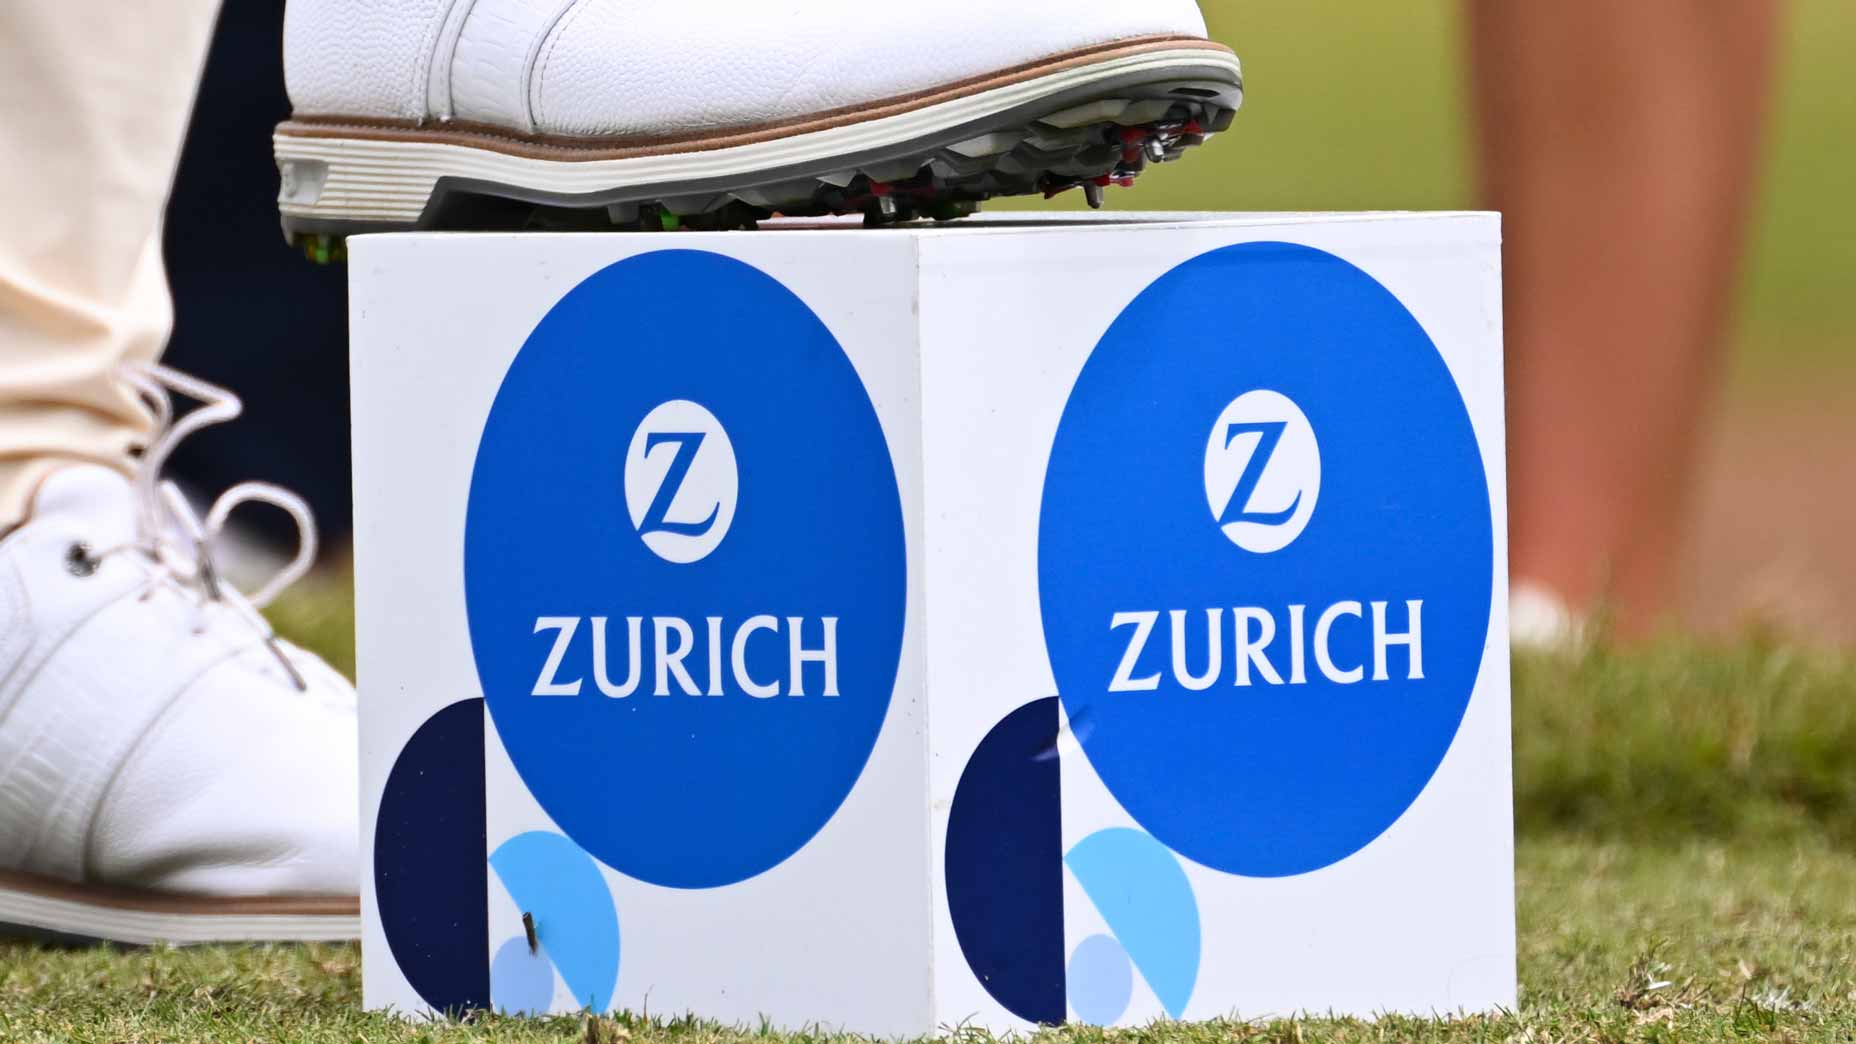 PGA Tour golfer puts foot on tee marker at 2023 Zurich Classic of New Orleans